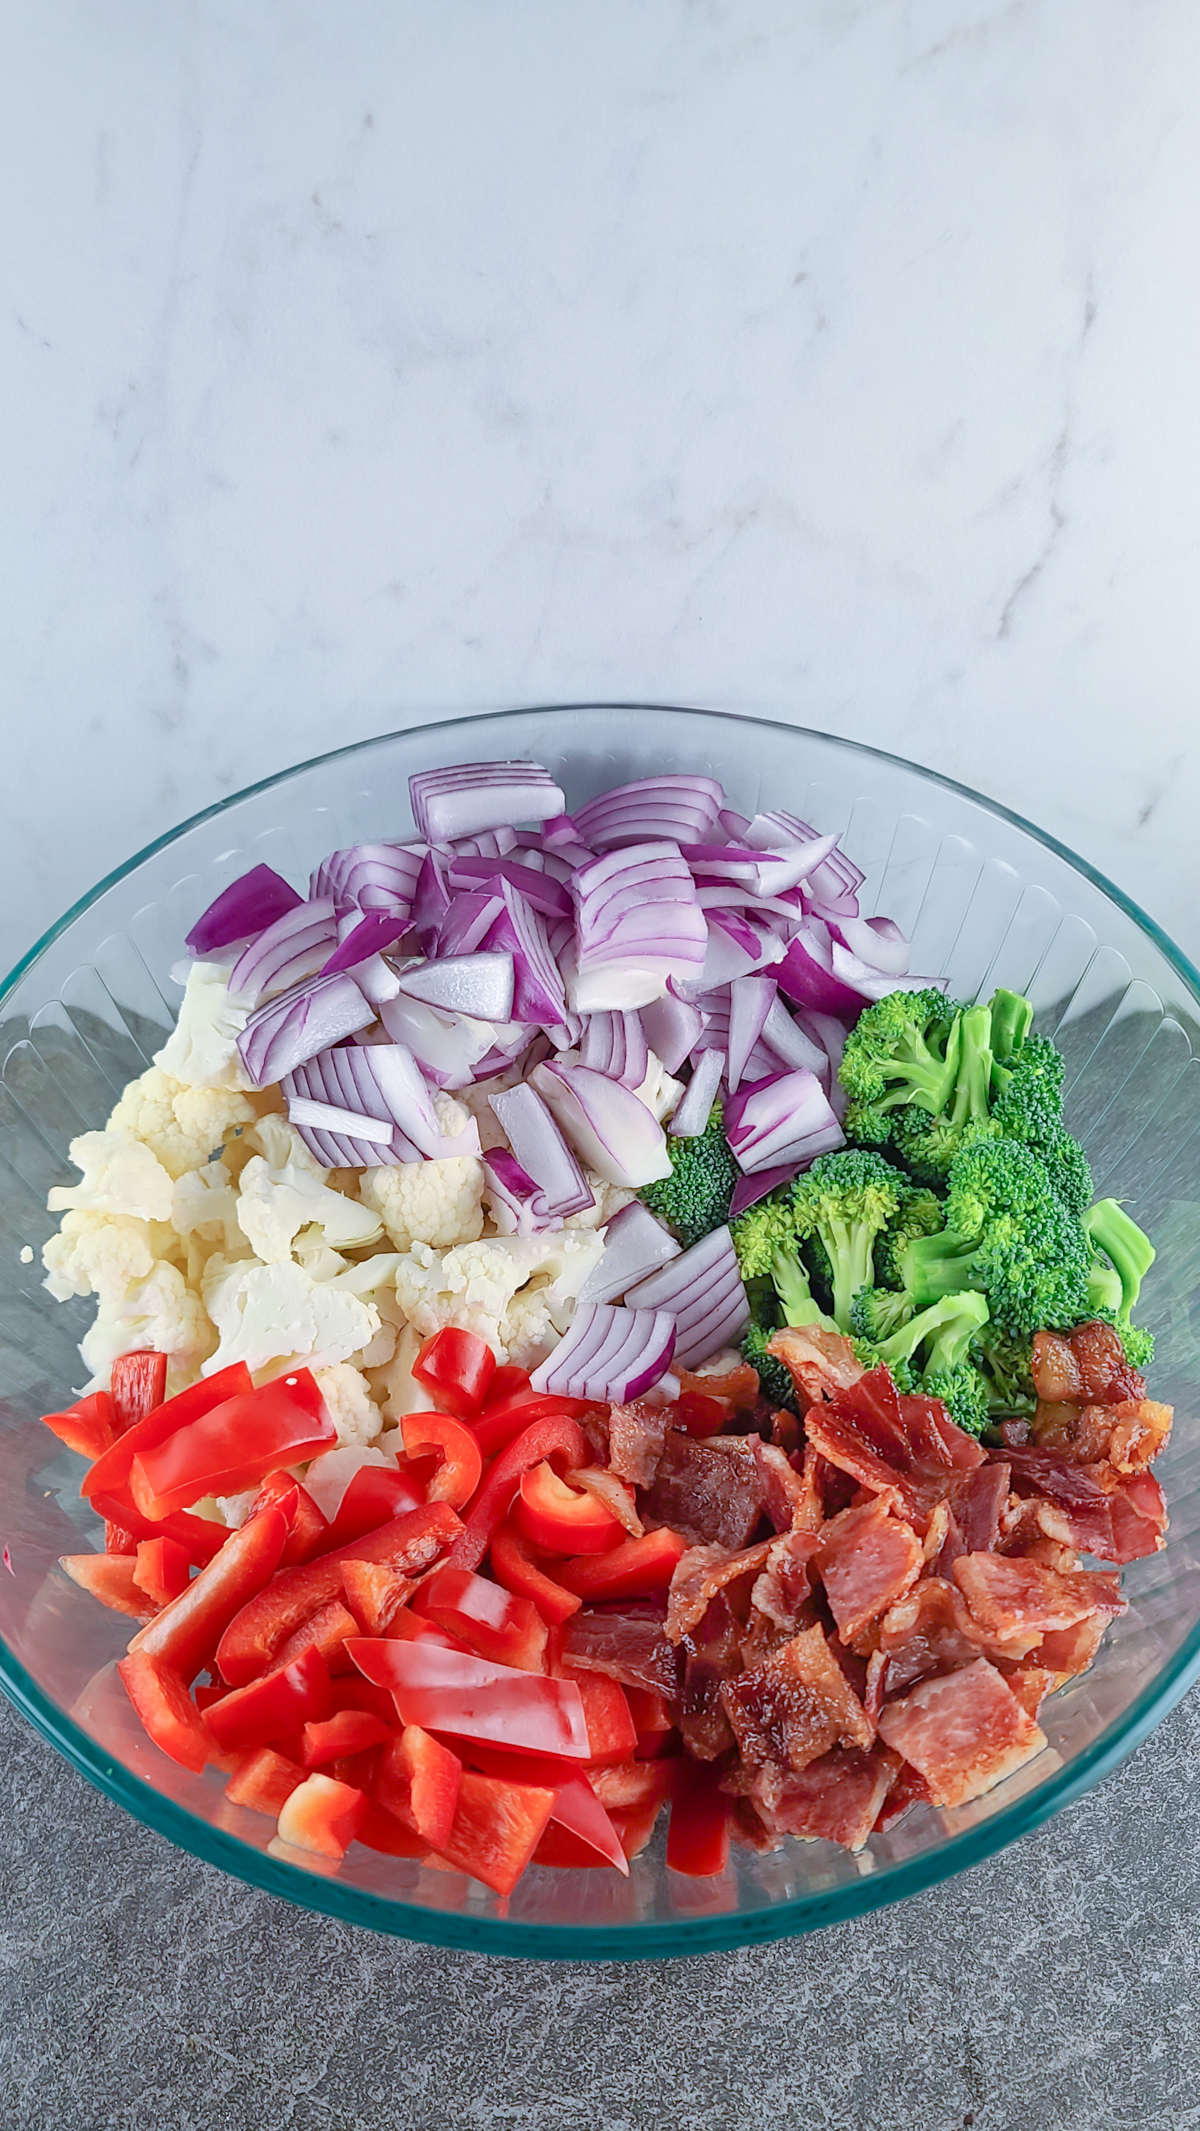 broccoli, cauliflower, red onion, red bell pepper, and bacon in a glass bowl on a slate surface with marble background